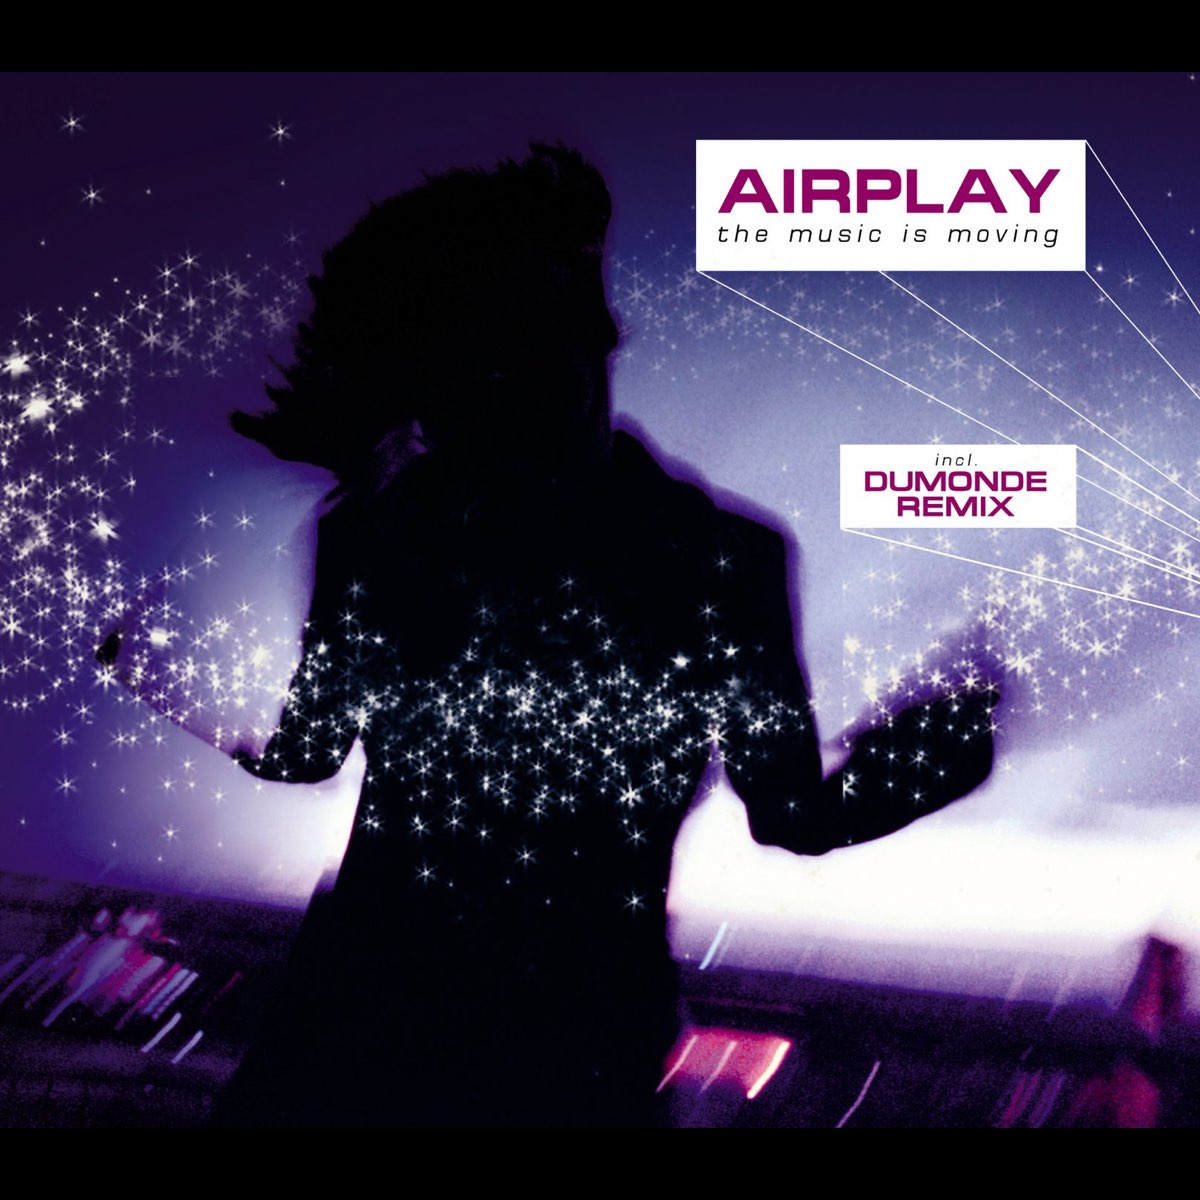 Airplay the Music is moving. Airplay - for your Love. The Music is New. GDNR музыка из. The unforgiven airplay mix